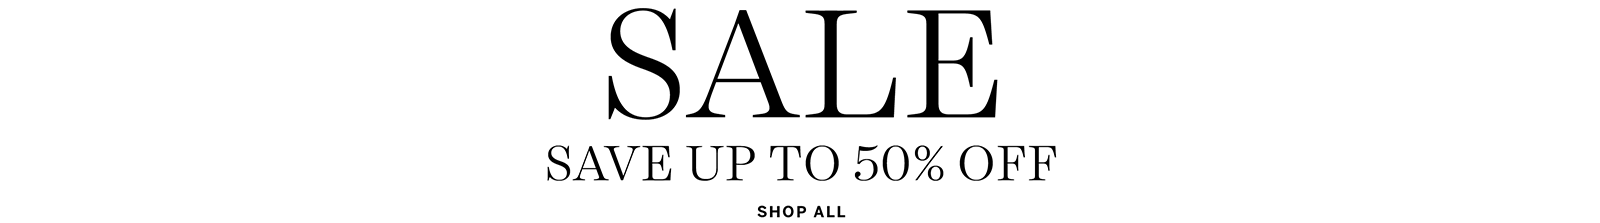 Sale save up to 50% off. Click to shop all.